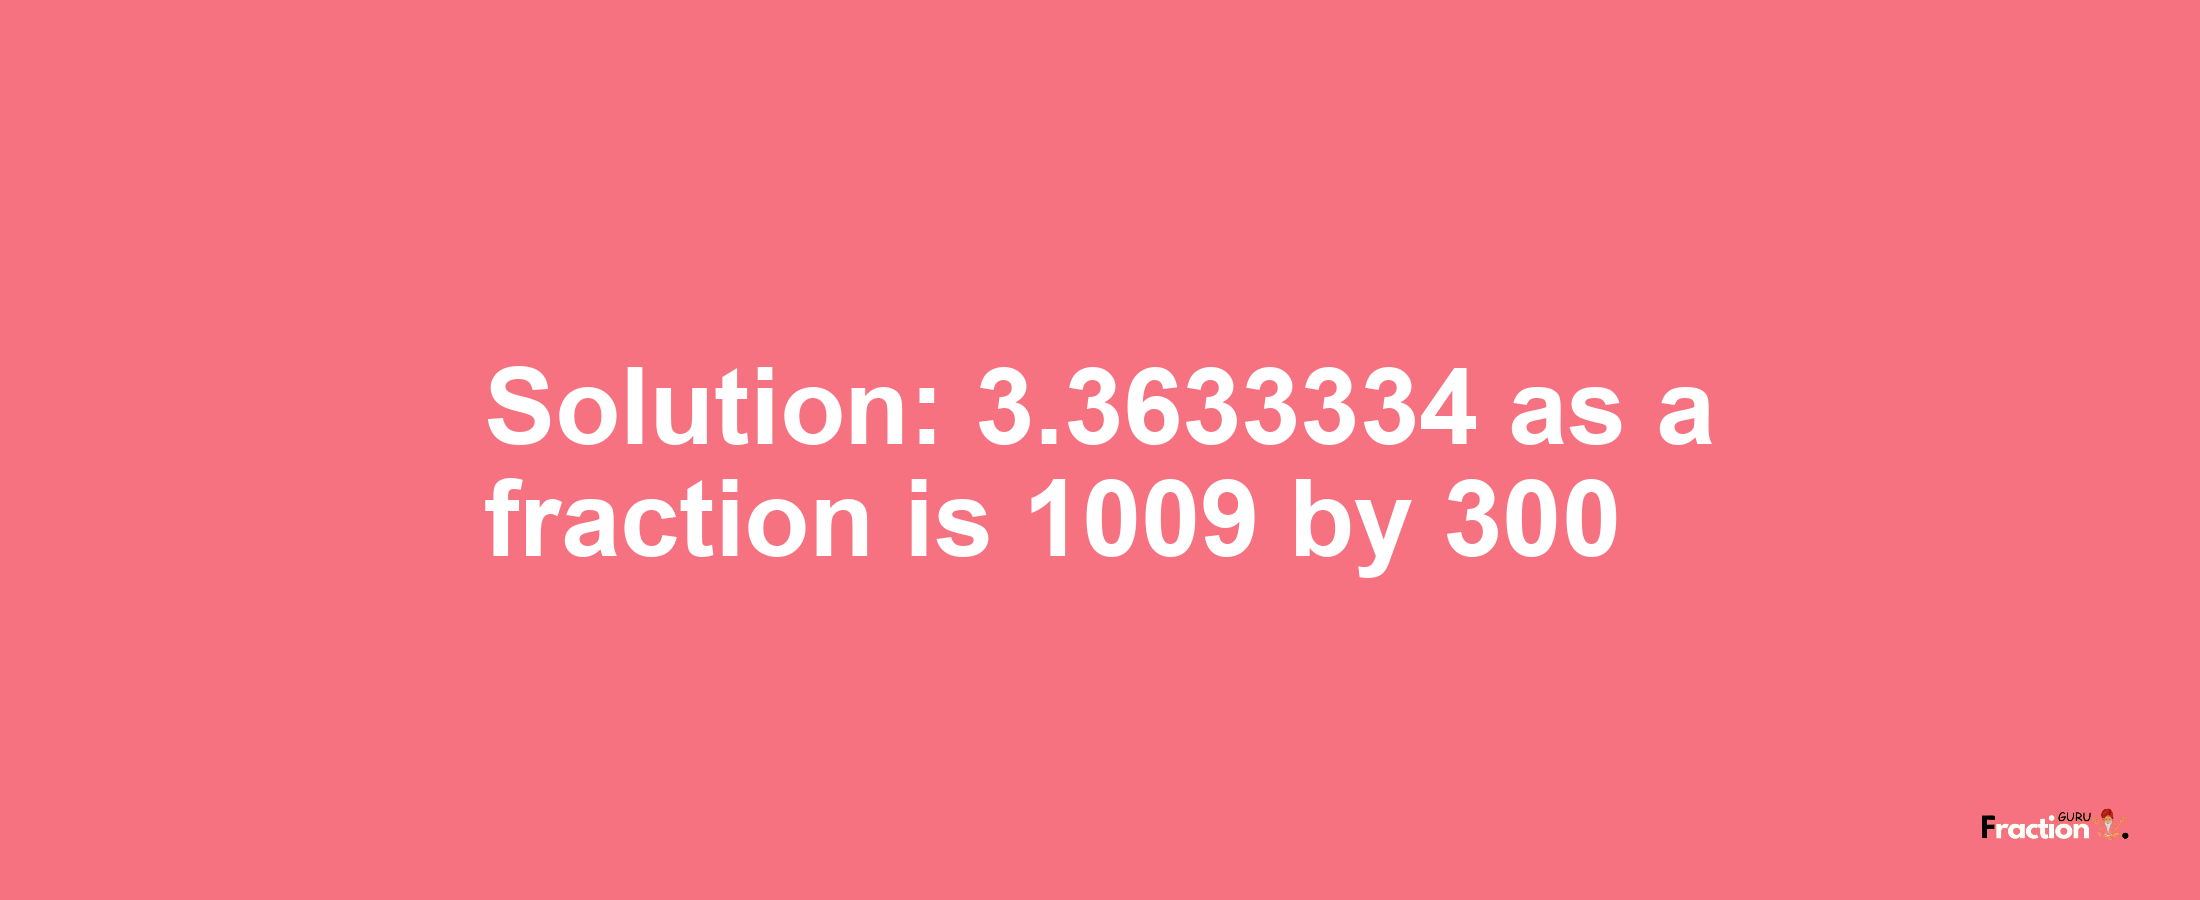 Solution:3.3633334 as a fraction is 1009/300